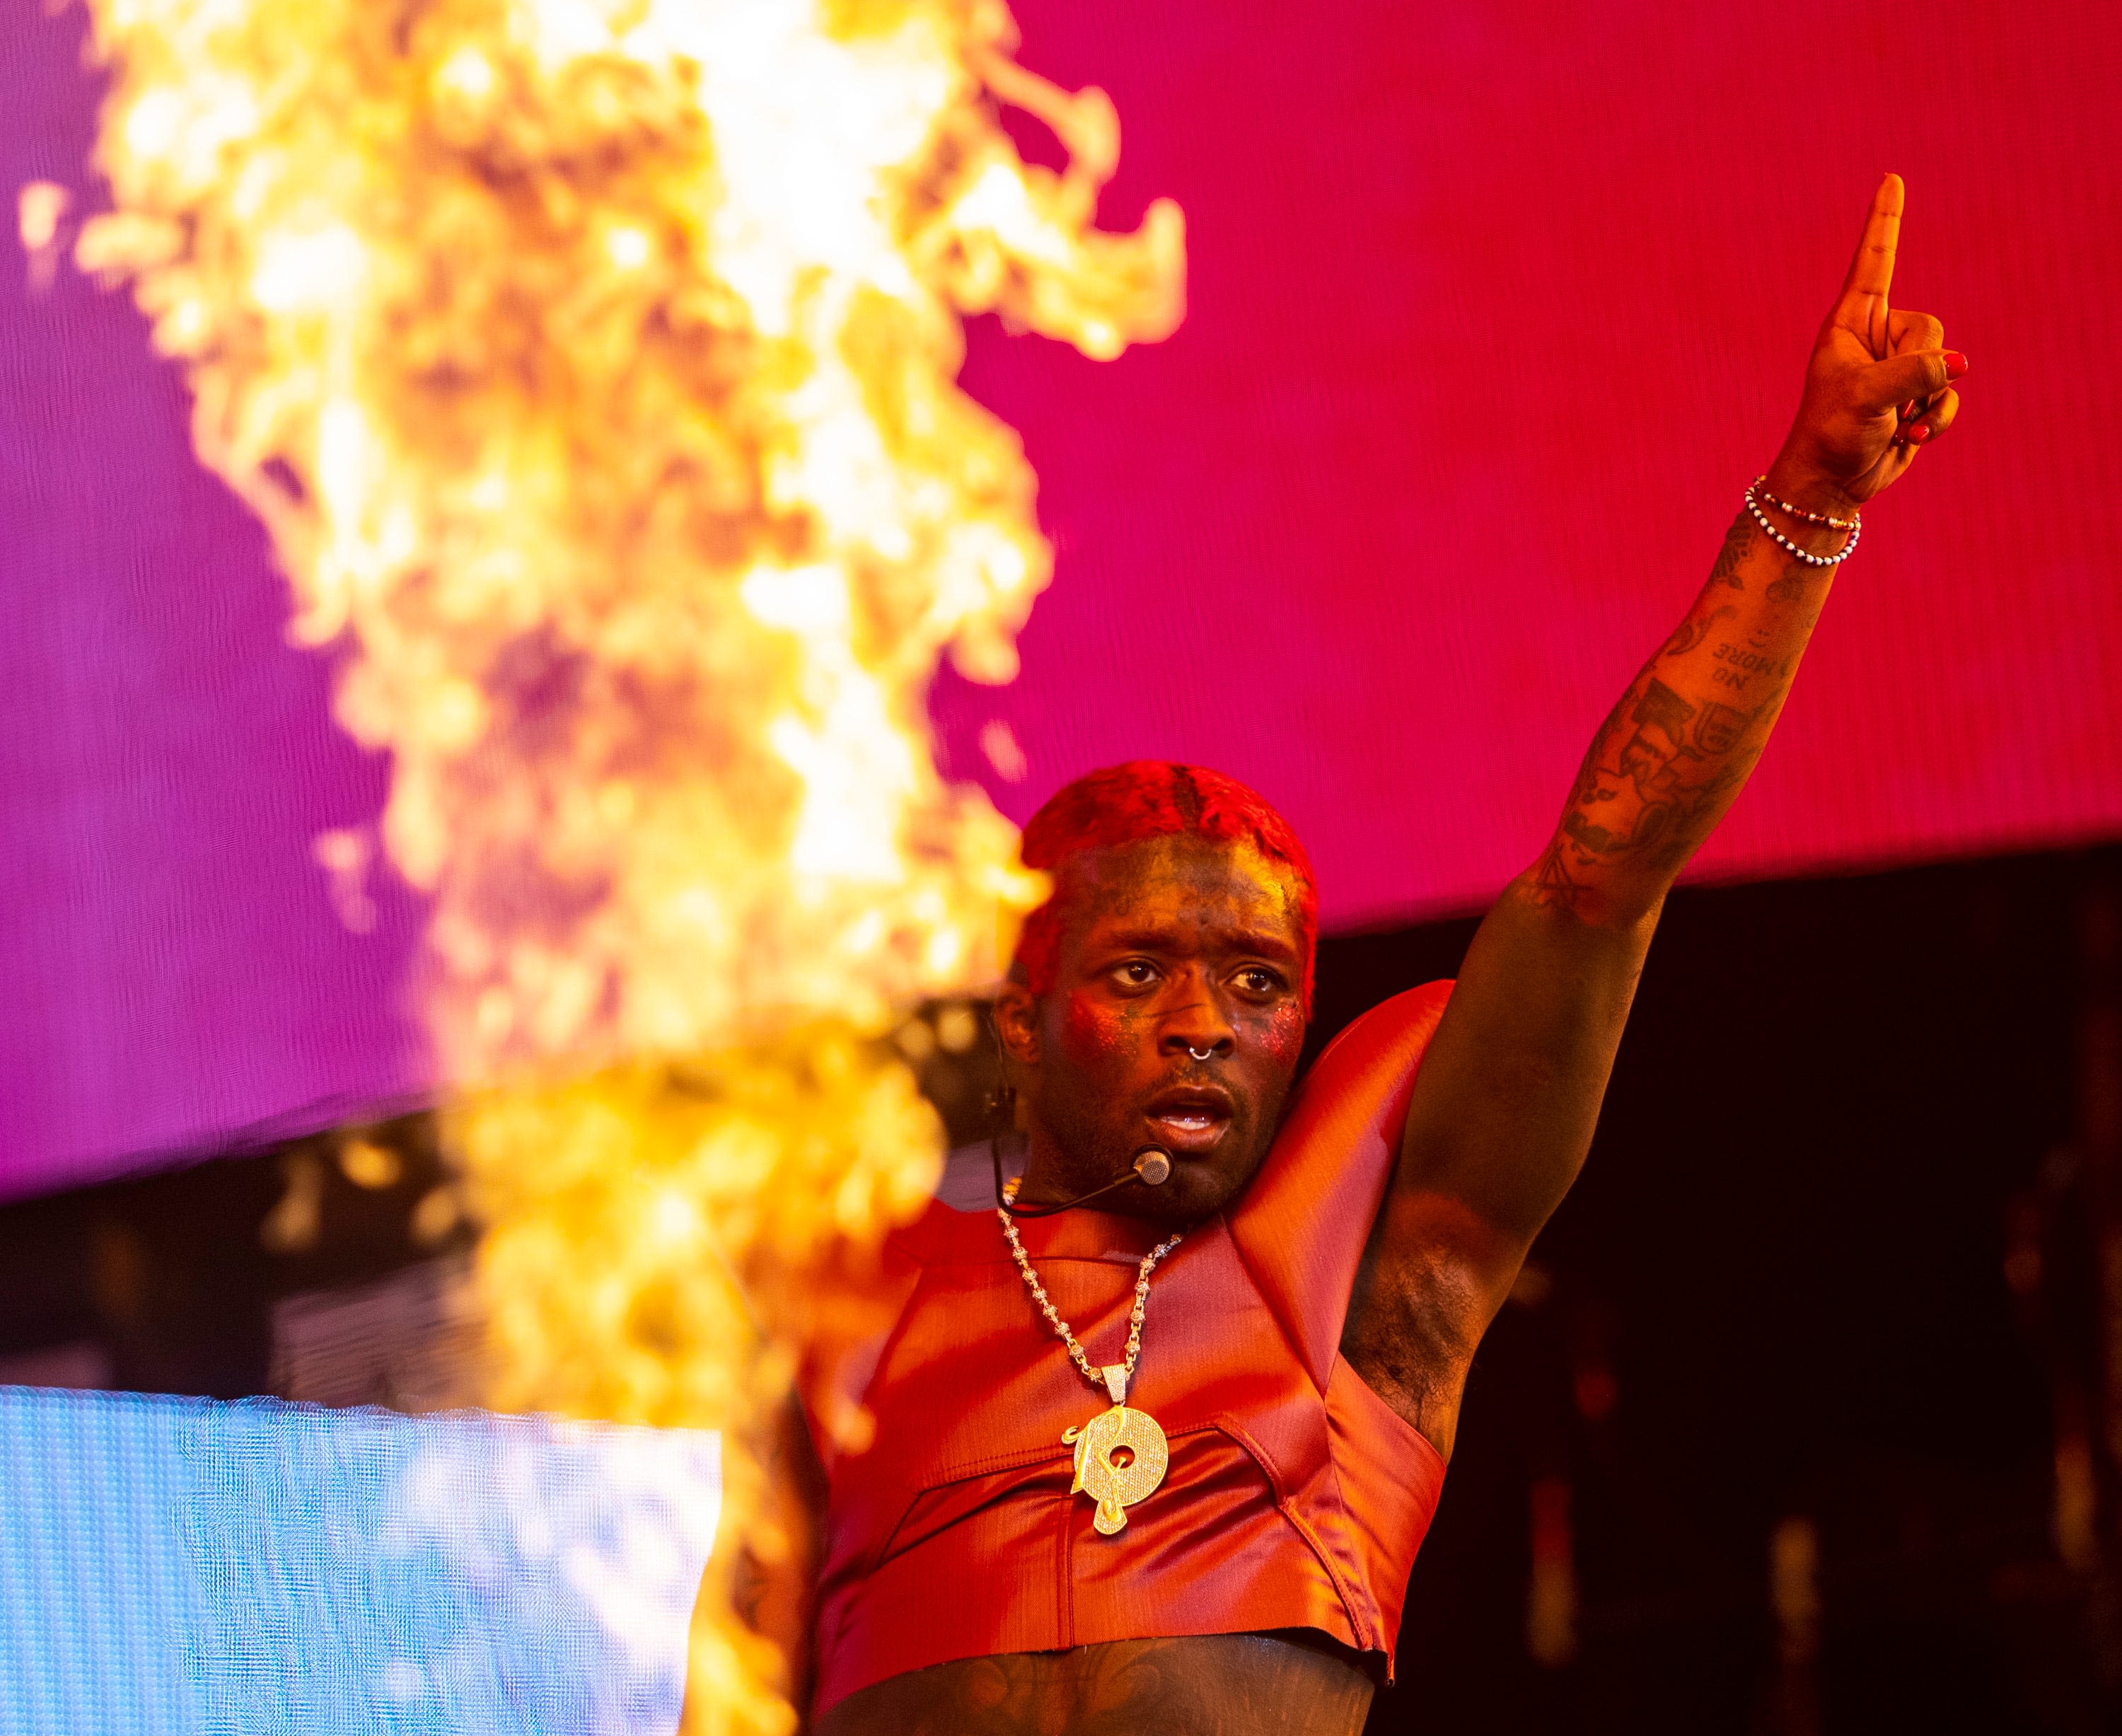 Lil Uzi Vert, Lil Yachty and more close out Milwaukee's Summerfest with a hip-hop feast